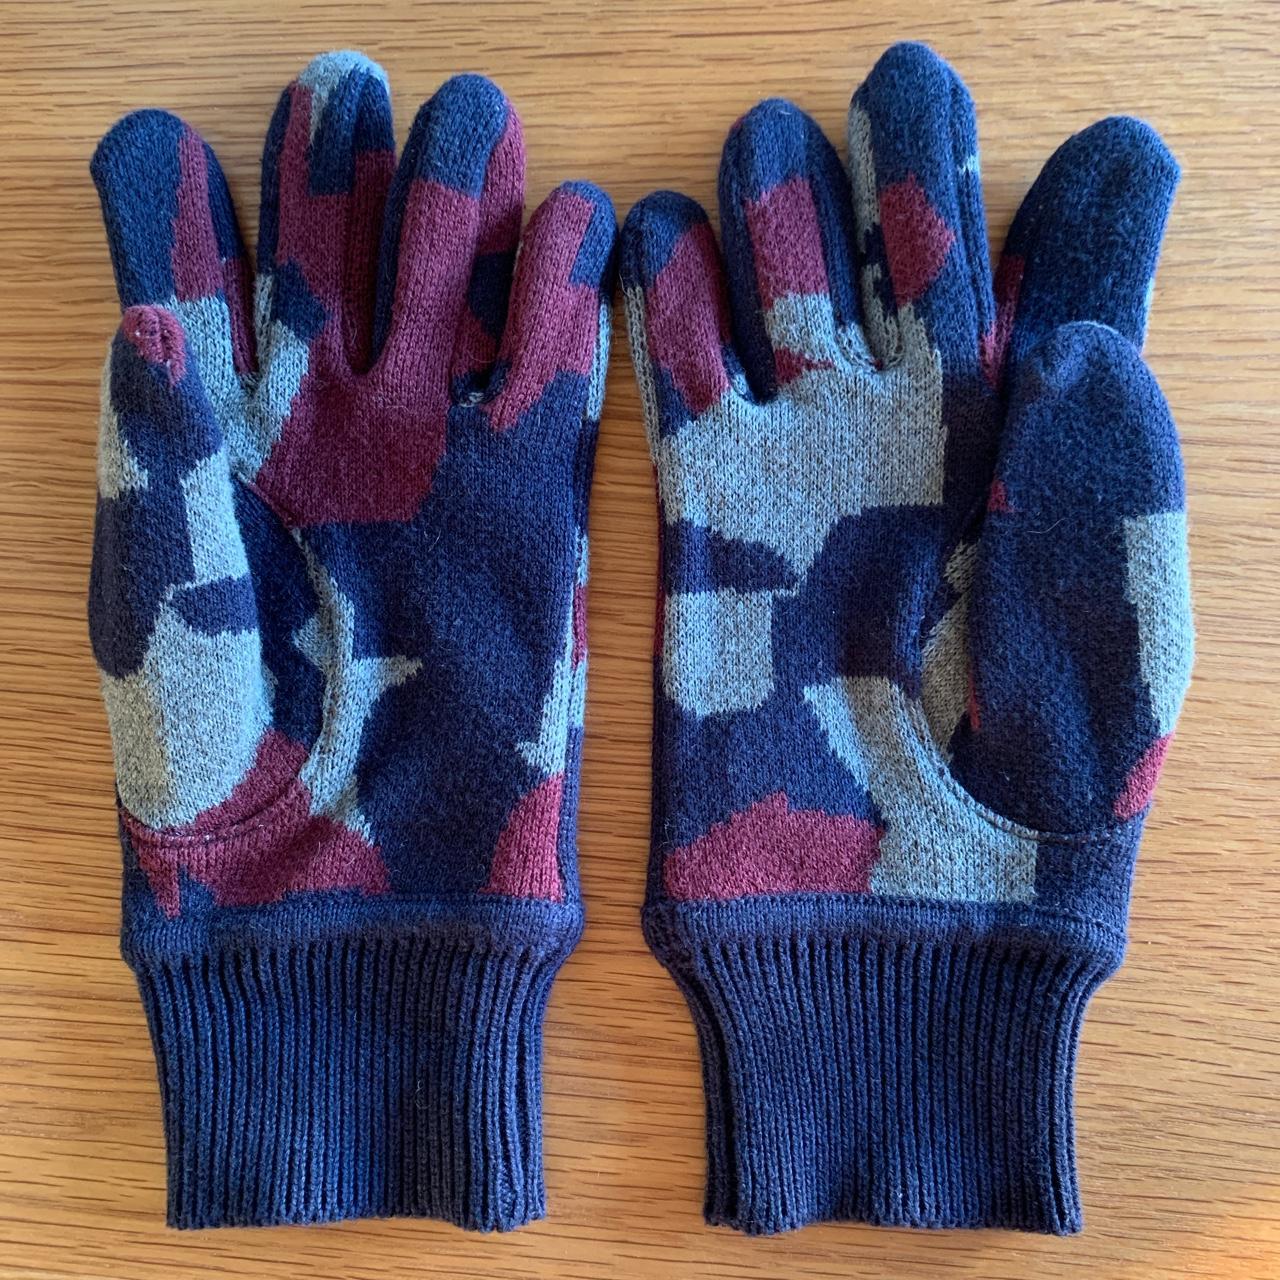 Lacoste Live Men's Burgundy and Navy Gloves (3)